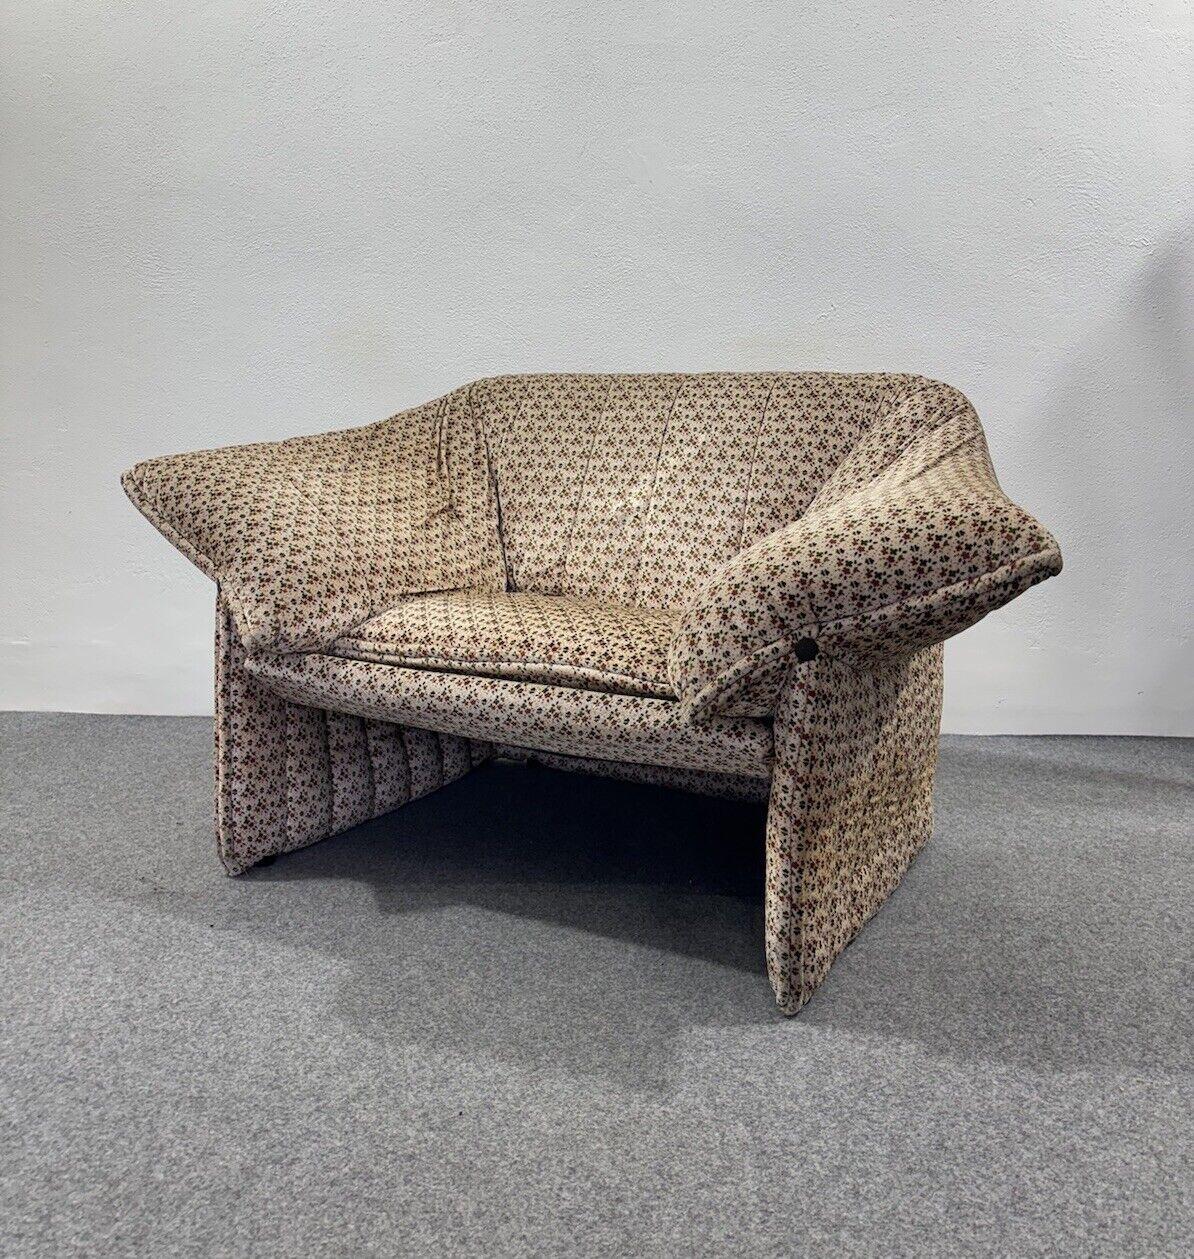 Mario Bellini B&B Italia Armchair Le Stelle Design Modernariato 1970's.

Metal frame, fabric upholstery. In good conservative condition, there is no major aesthetic or structural defect to report, only slight and obvious signs of time, fabric